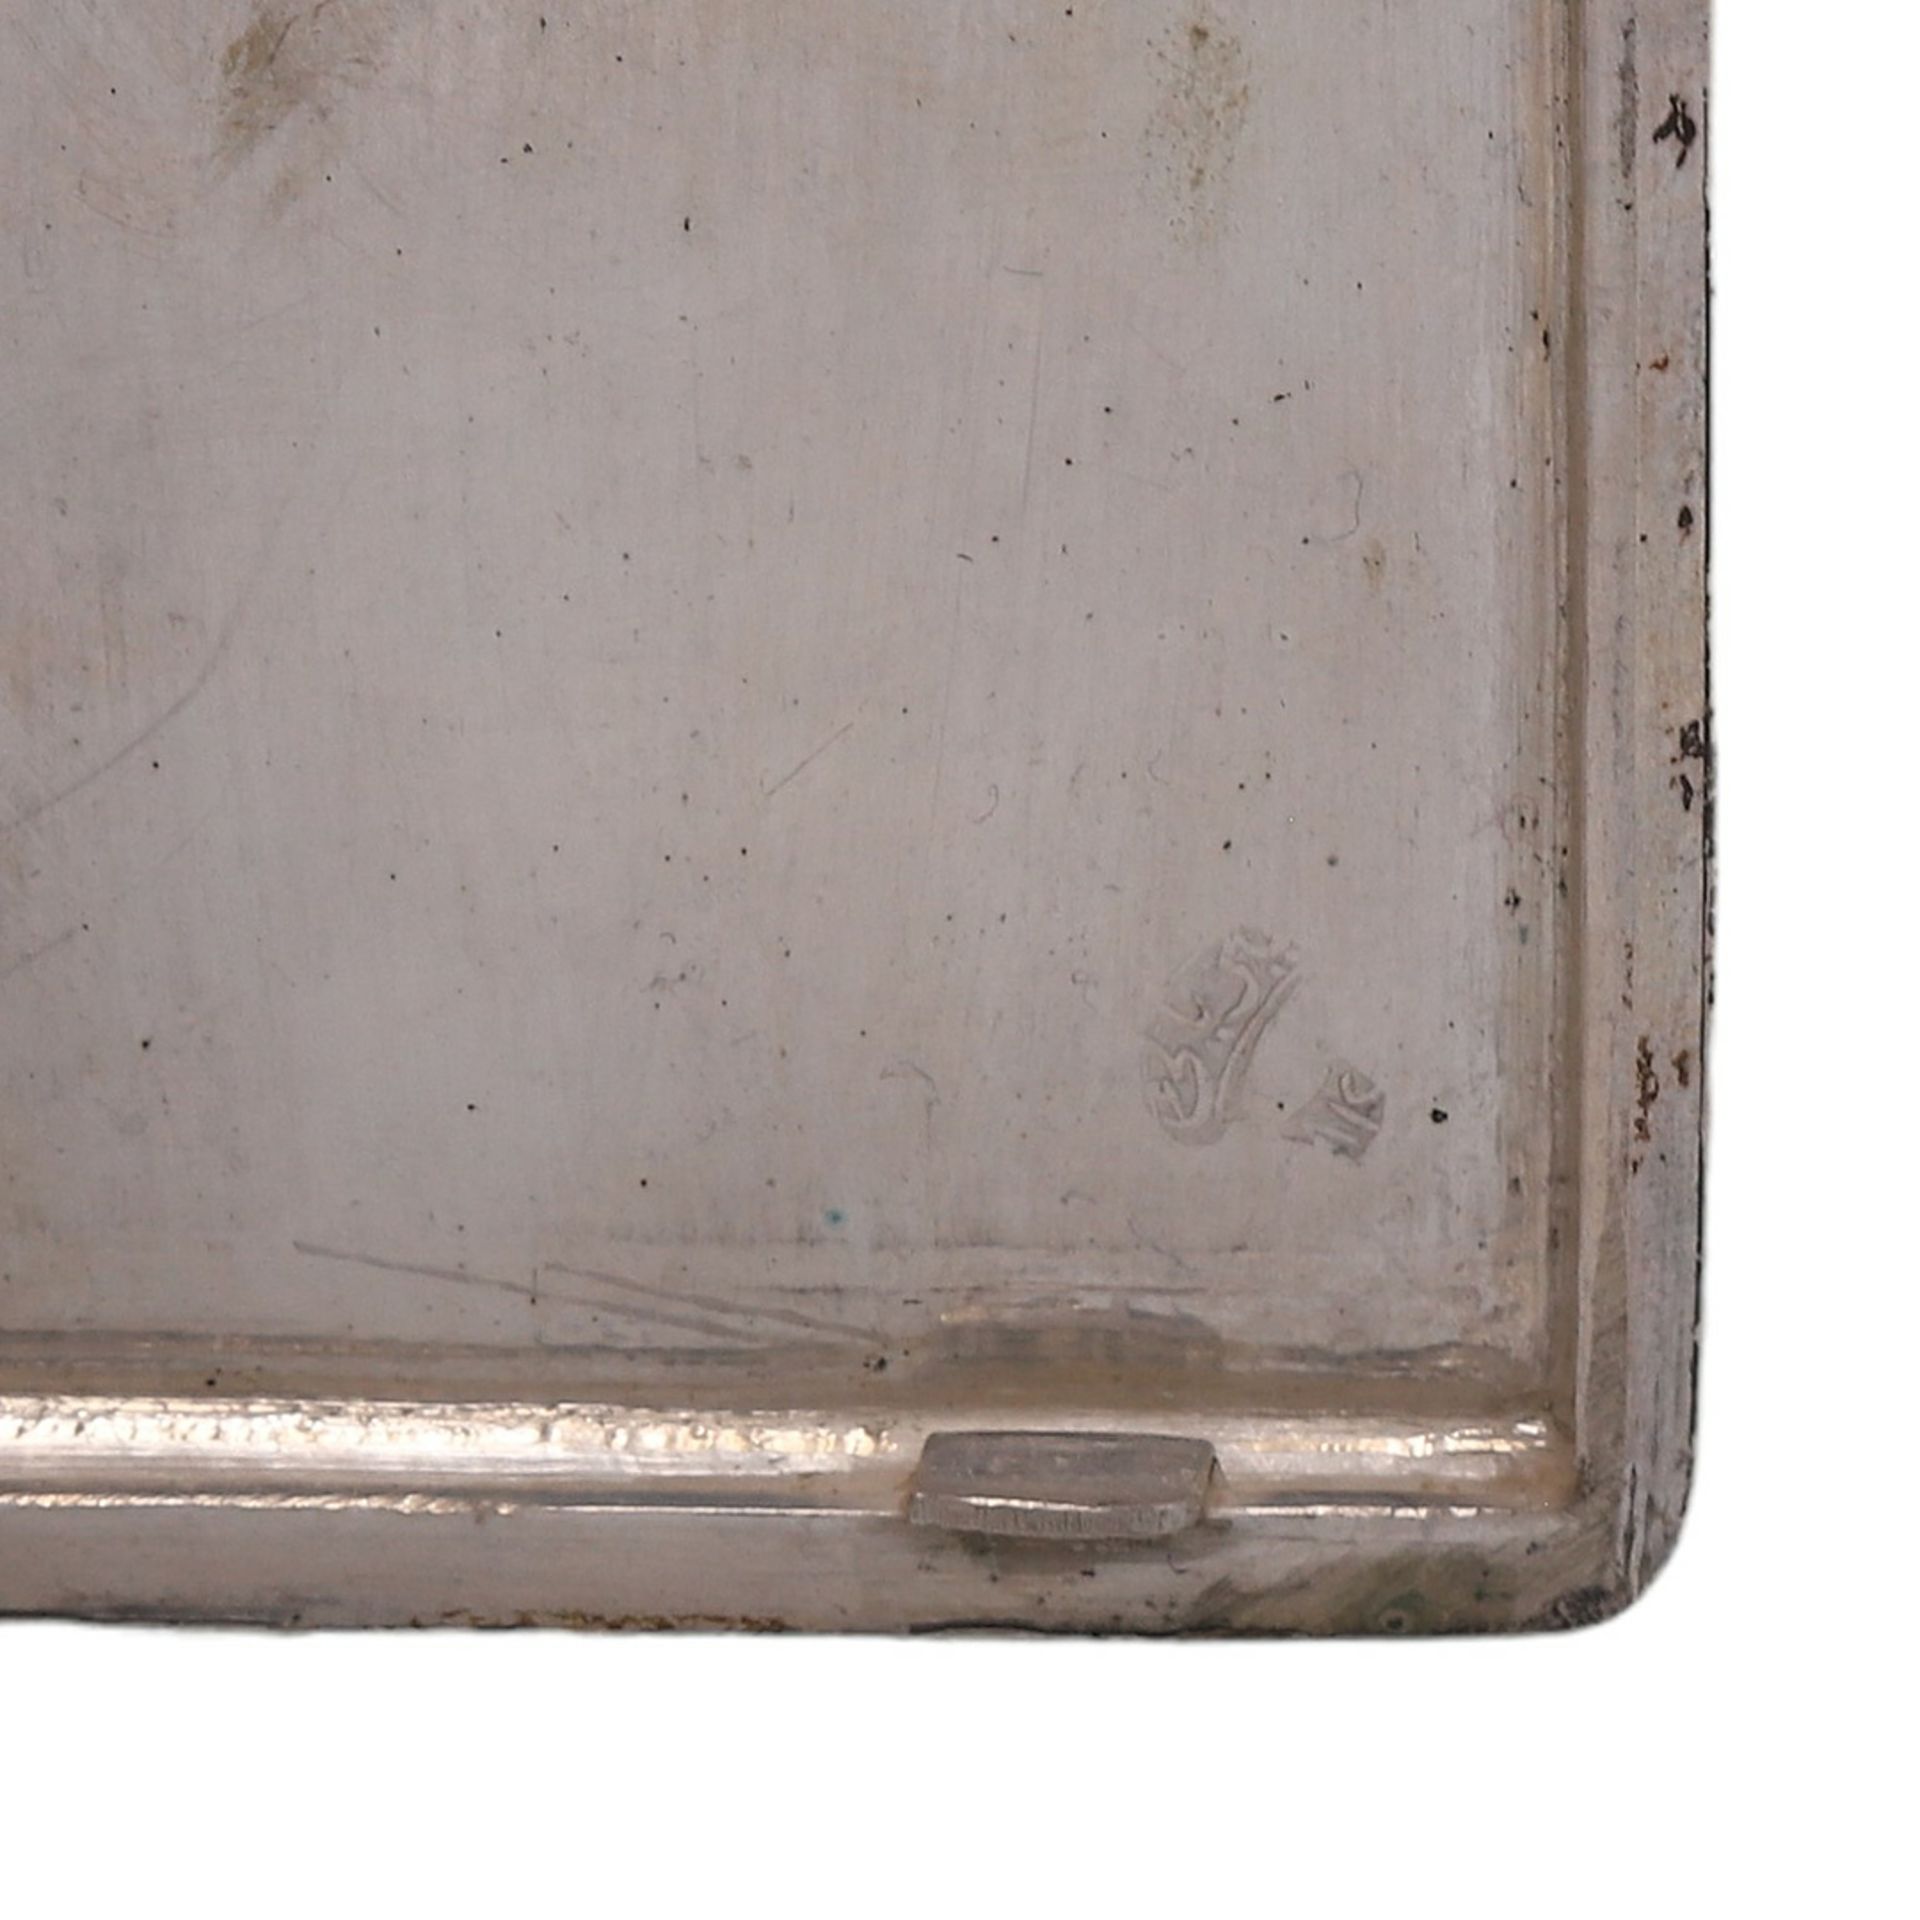 Flat cigarette case, Middle East, mid-20th century - Image 4 of 4